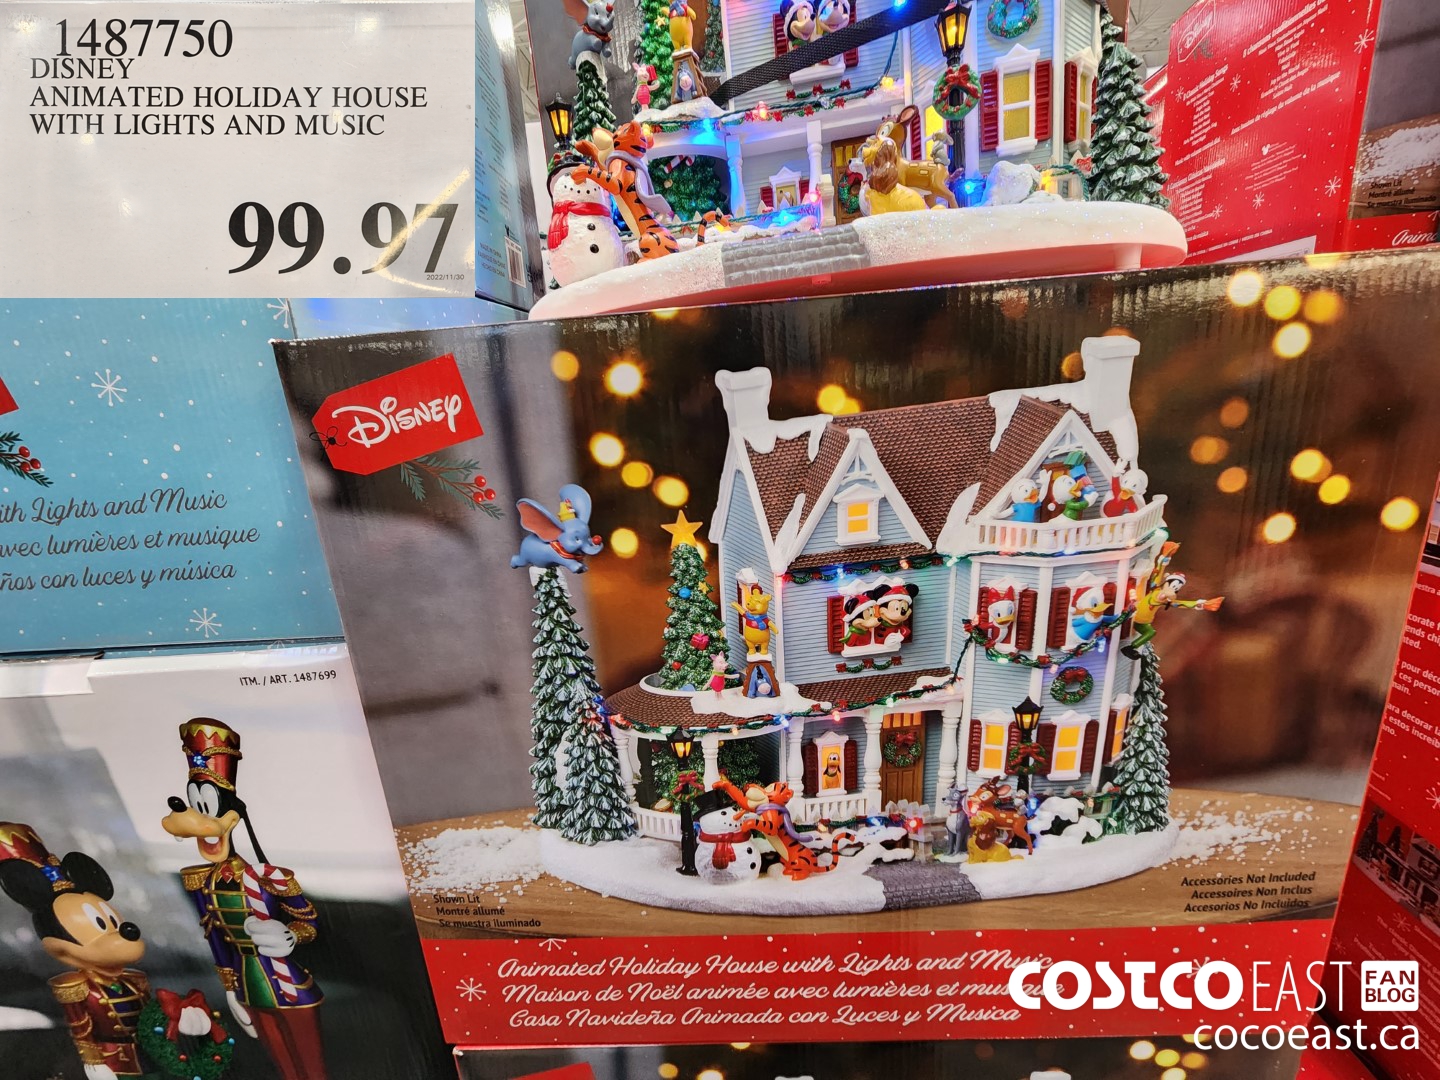 1487750 DISNEY ANIMATED HOLIDAY HOUSE WITH LIGHTS AND MUSIC 99 97 - Costco  East Fan Blog